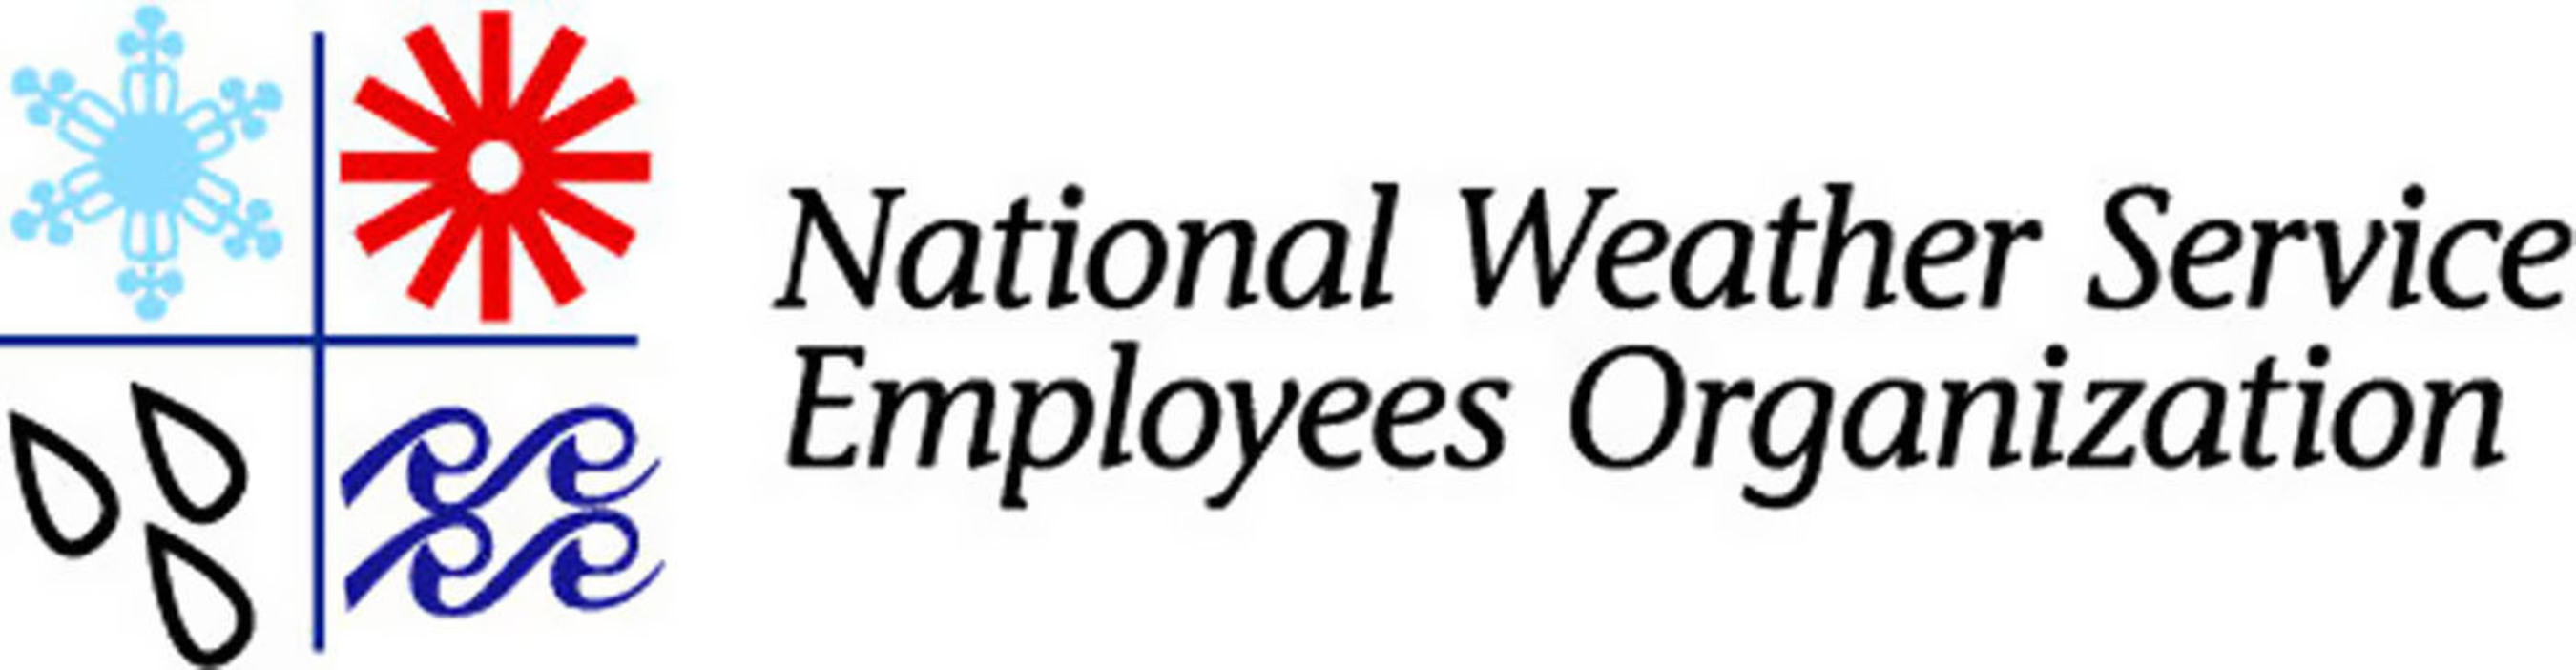 National Weather Service Employees Organization Logo. (PRNewsFoto/National Weather Service Employees Organization) (PRNewsFoto/)